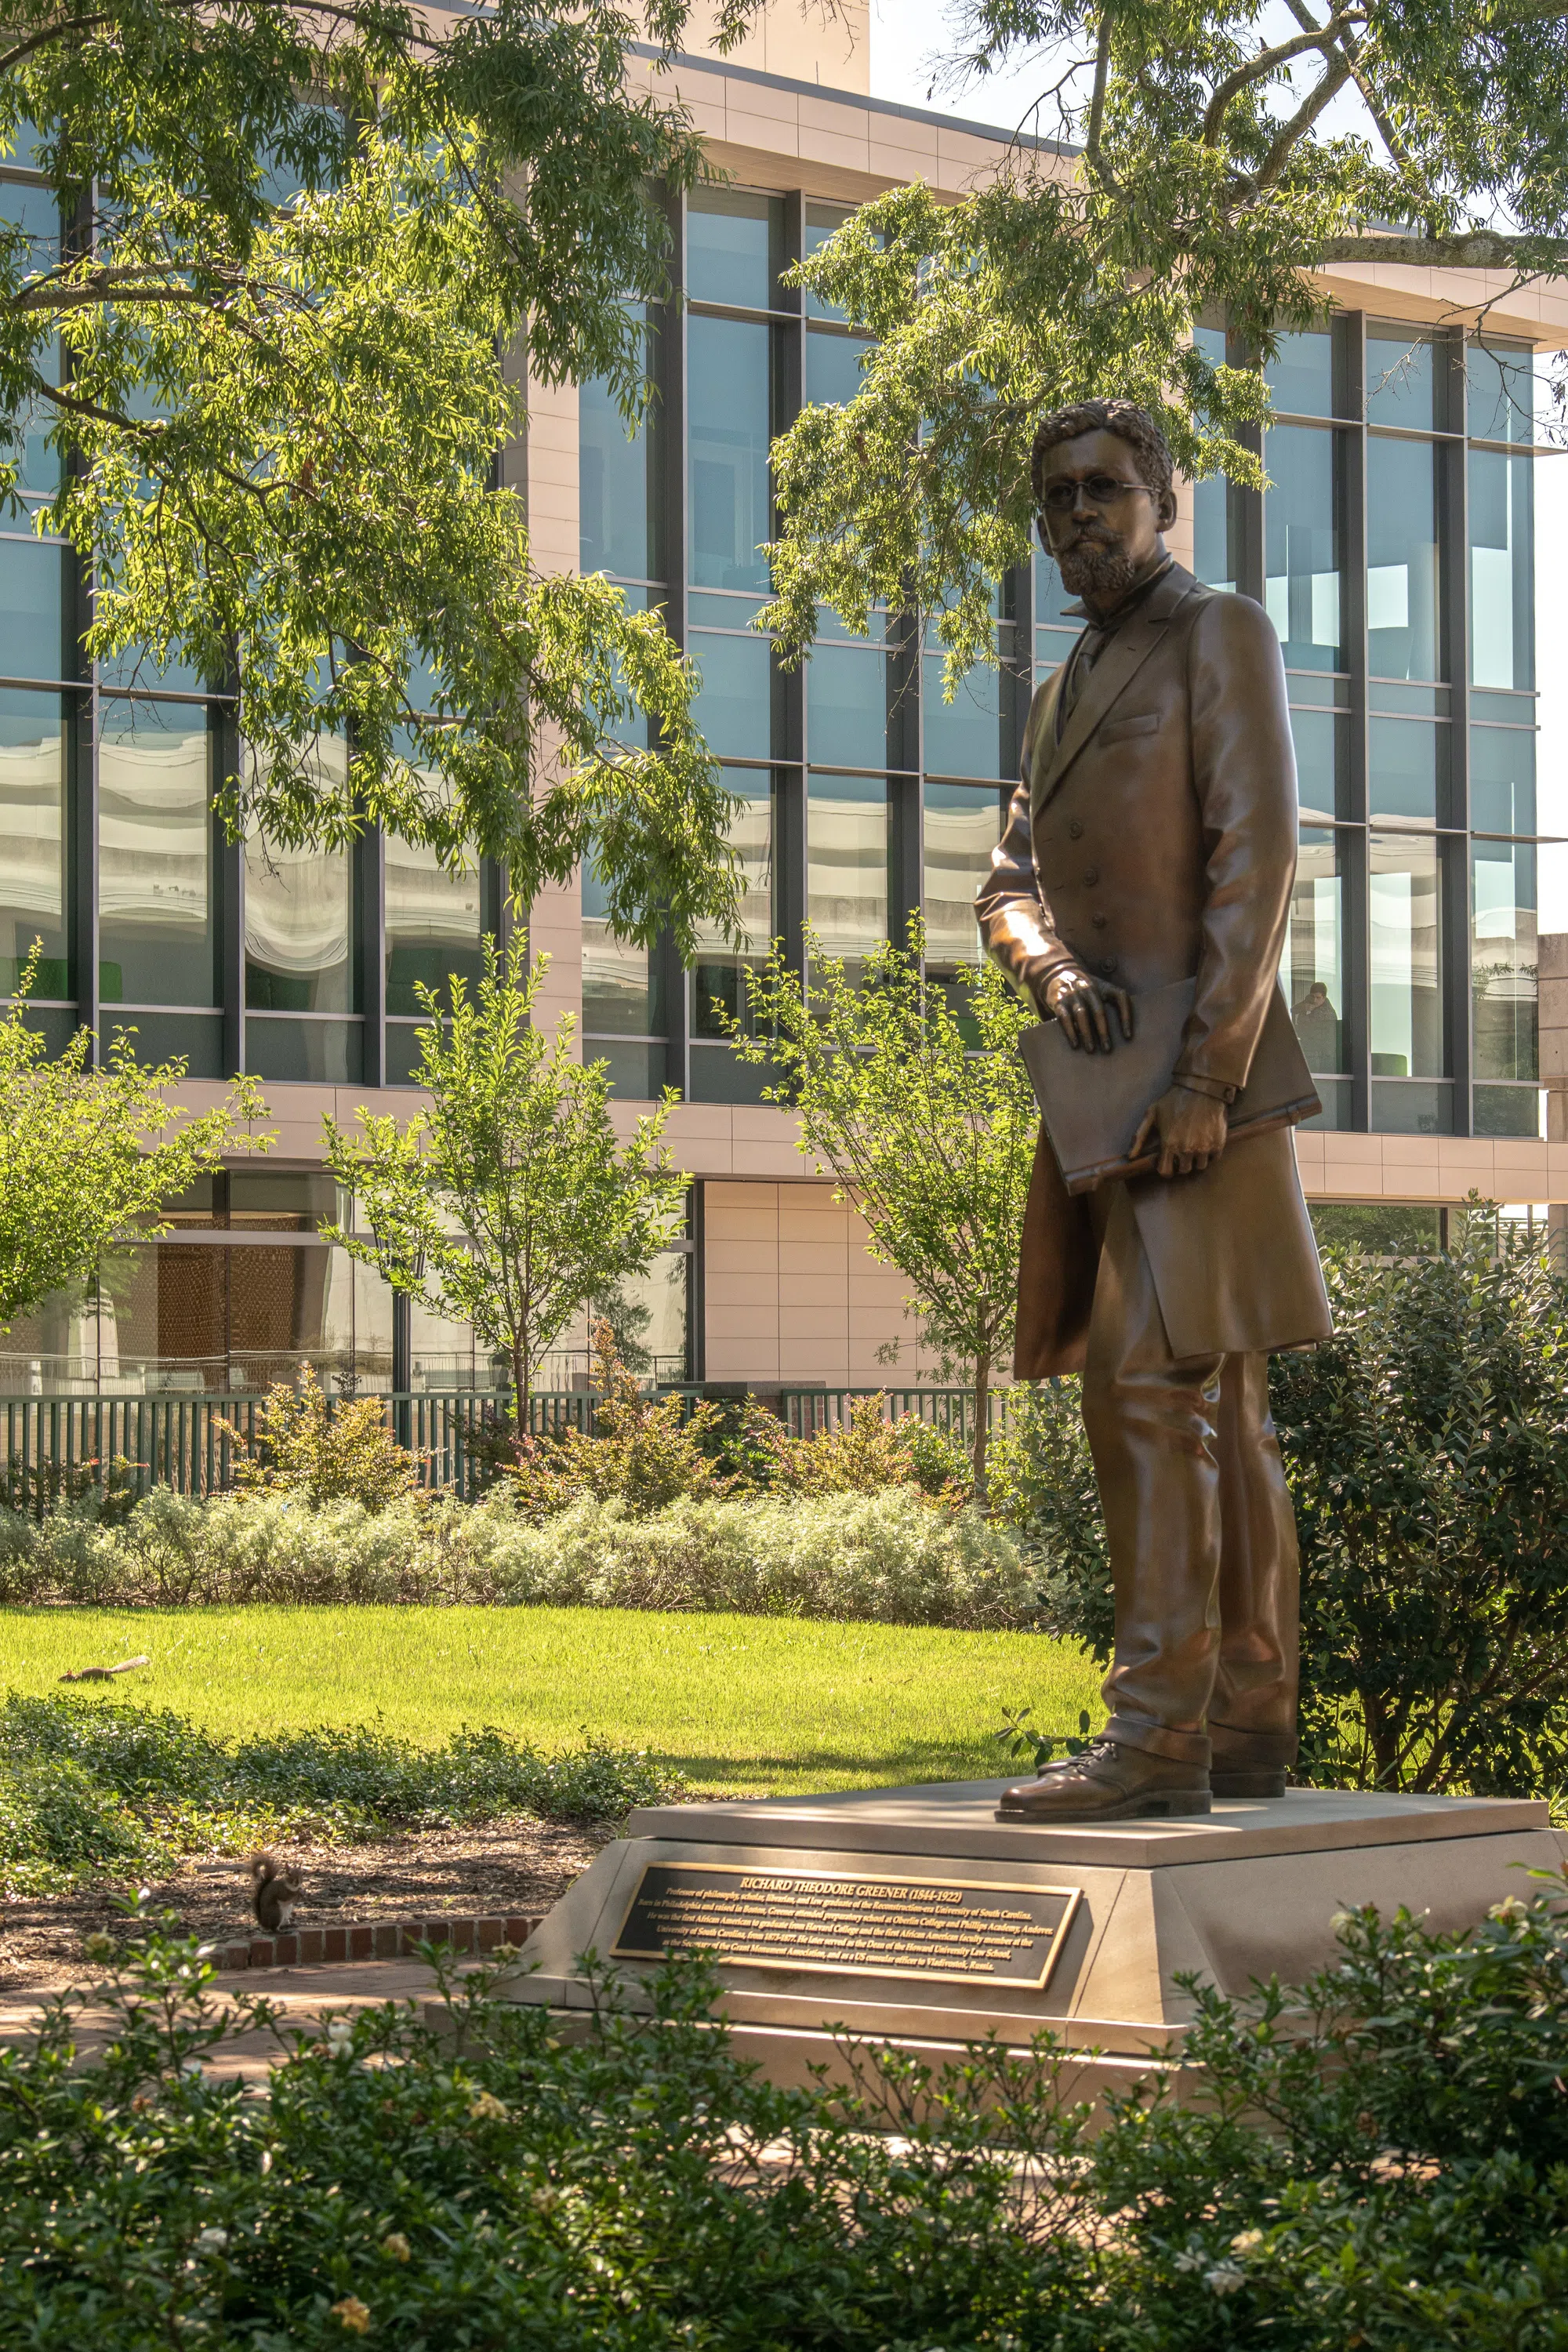 The Richard T. Greener statue stands tall in front of the Center for Health and Well-Being.